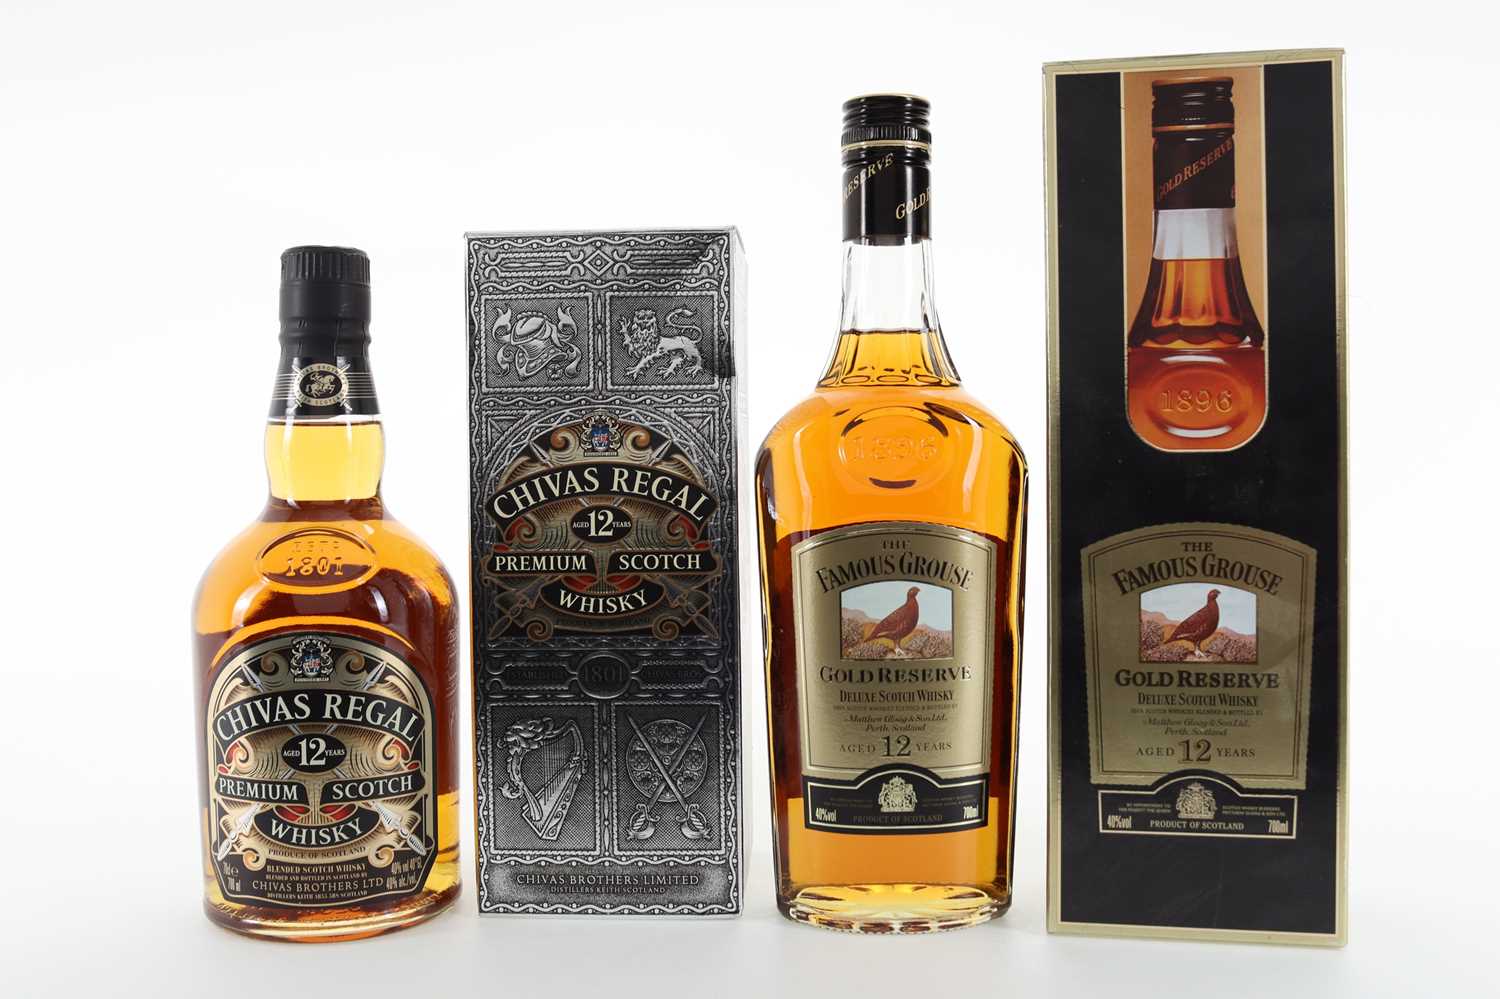 Lot 83 - FAMOUS GROUSE 12 YEAR OLD GOLD RESERVE AND CHIVAS REGAL 12 YEAR OLD